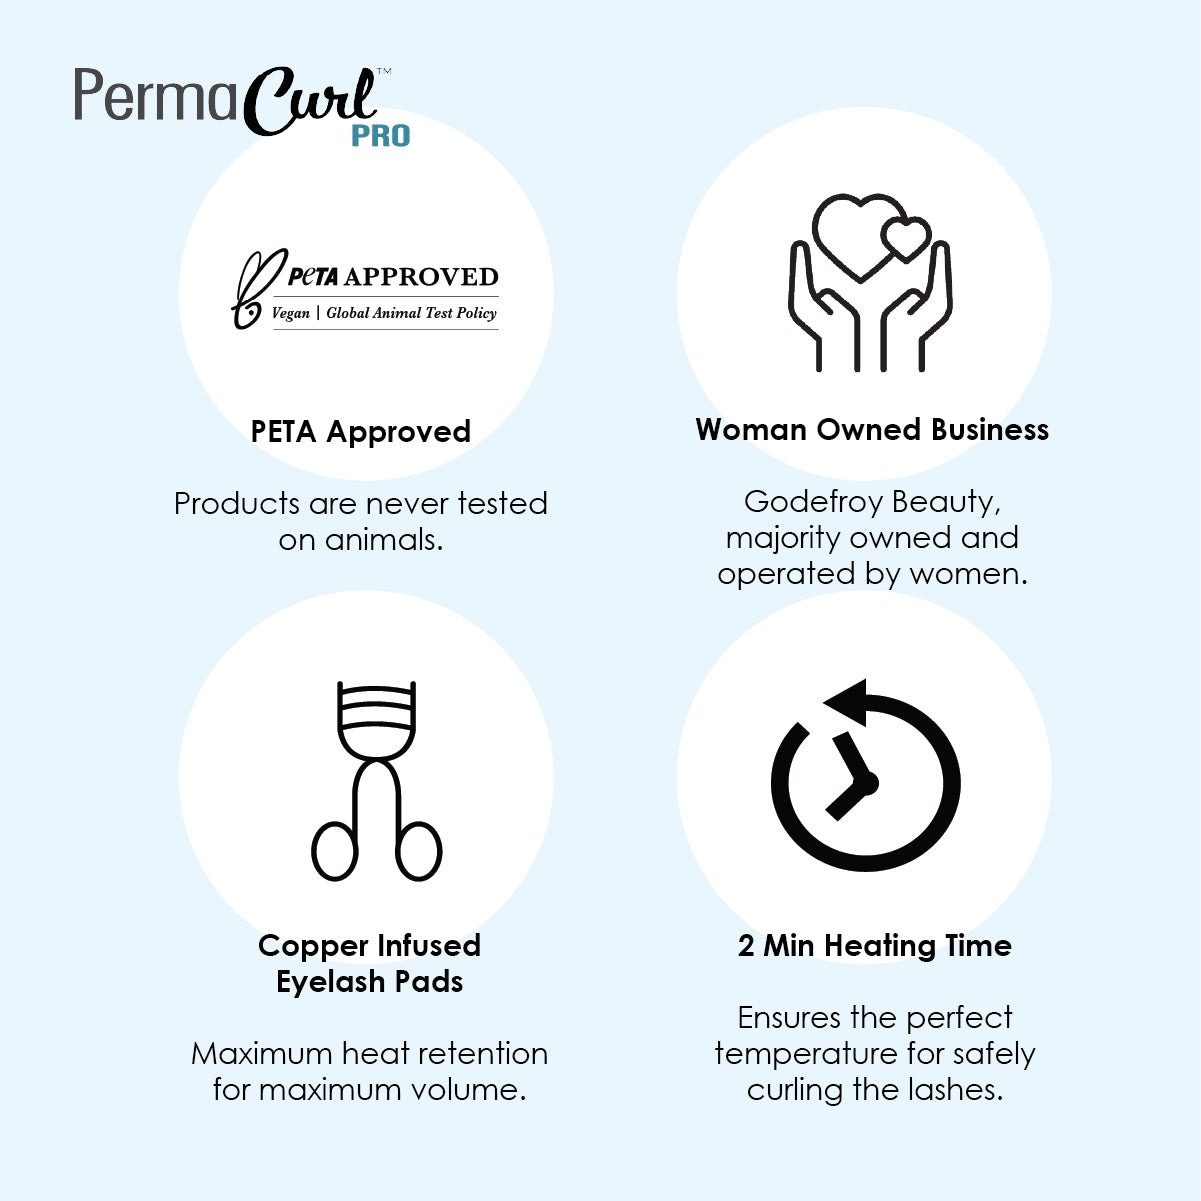 information on perma curl pro and godefroy